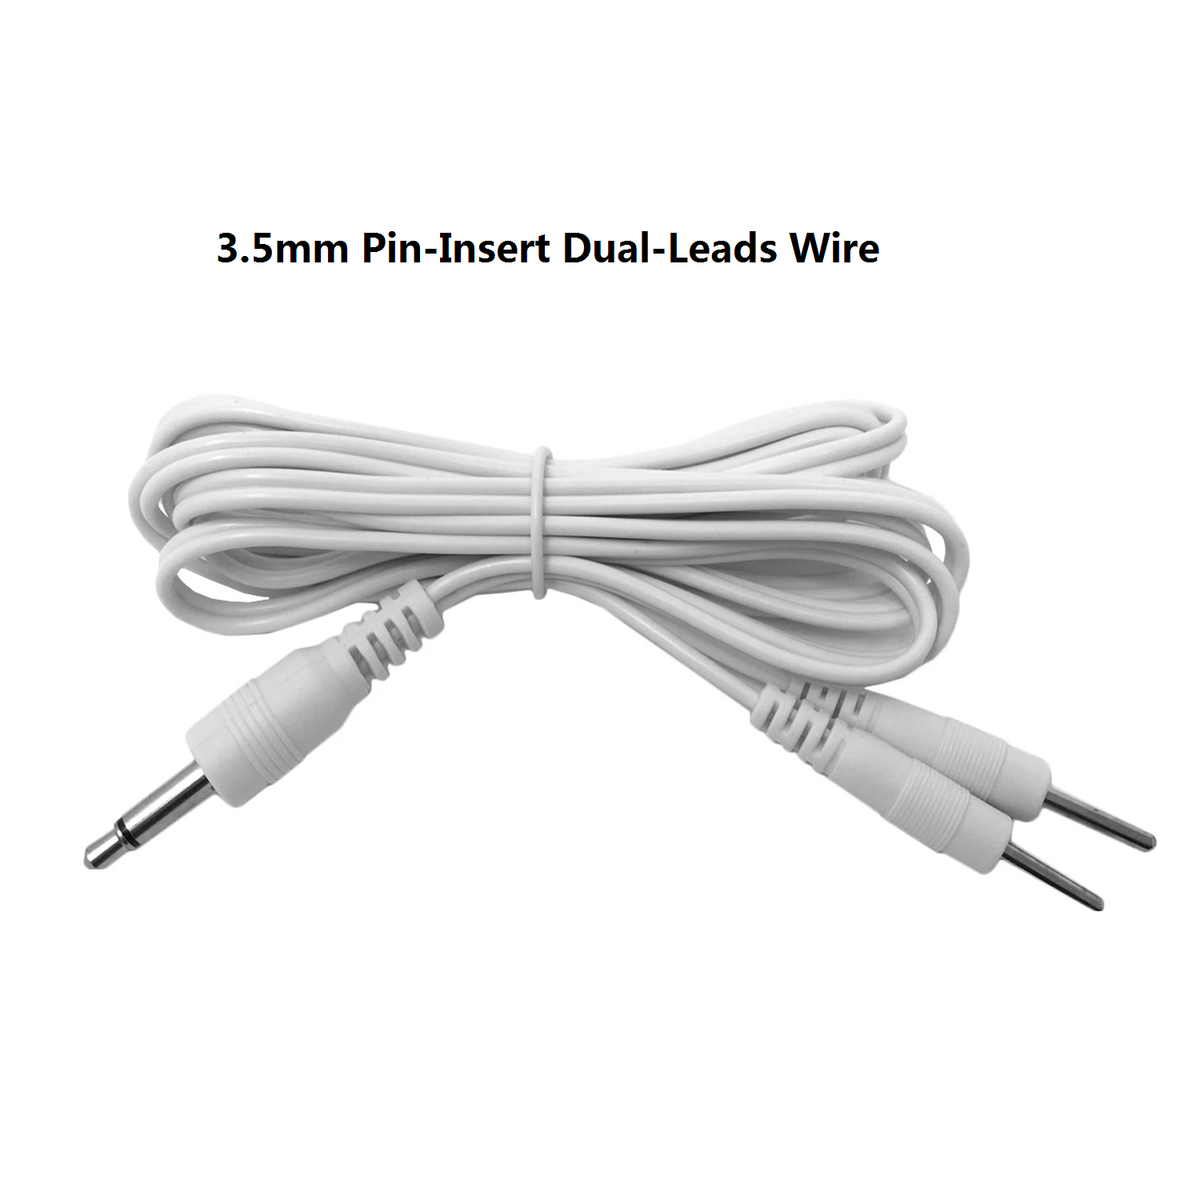 2 Sets of Pin-Insert Dual-Leads Electrode Wires | HealthmateForever.com